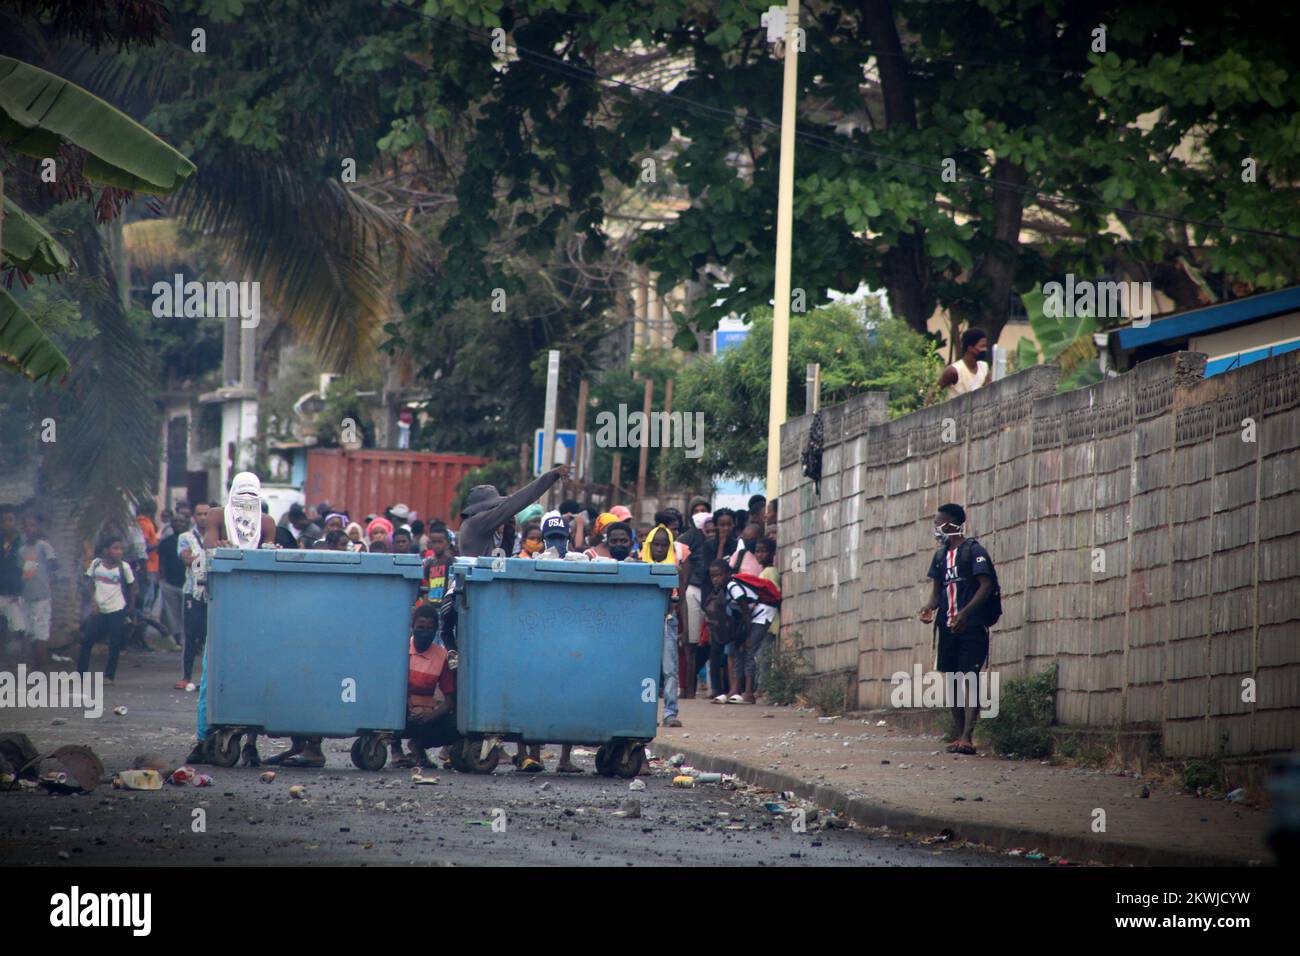 In Doujani neighborhood in Mamoudzou, following a vast arrest operation of illegal migrants and after two days of road blocade and buses attacks, rioters with the help of young inhabitants of the quarter scuffle with police forces. Seeing that the police couldn't cope with the violence of the crowd, motorist decided to enter the scene and throw stones back to the rioters, on September 2 2020 in Mayotte, France. Photo by Gregoire Merot/ABACAPRESS.COM Stock Photo